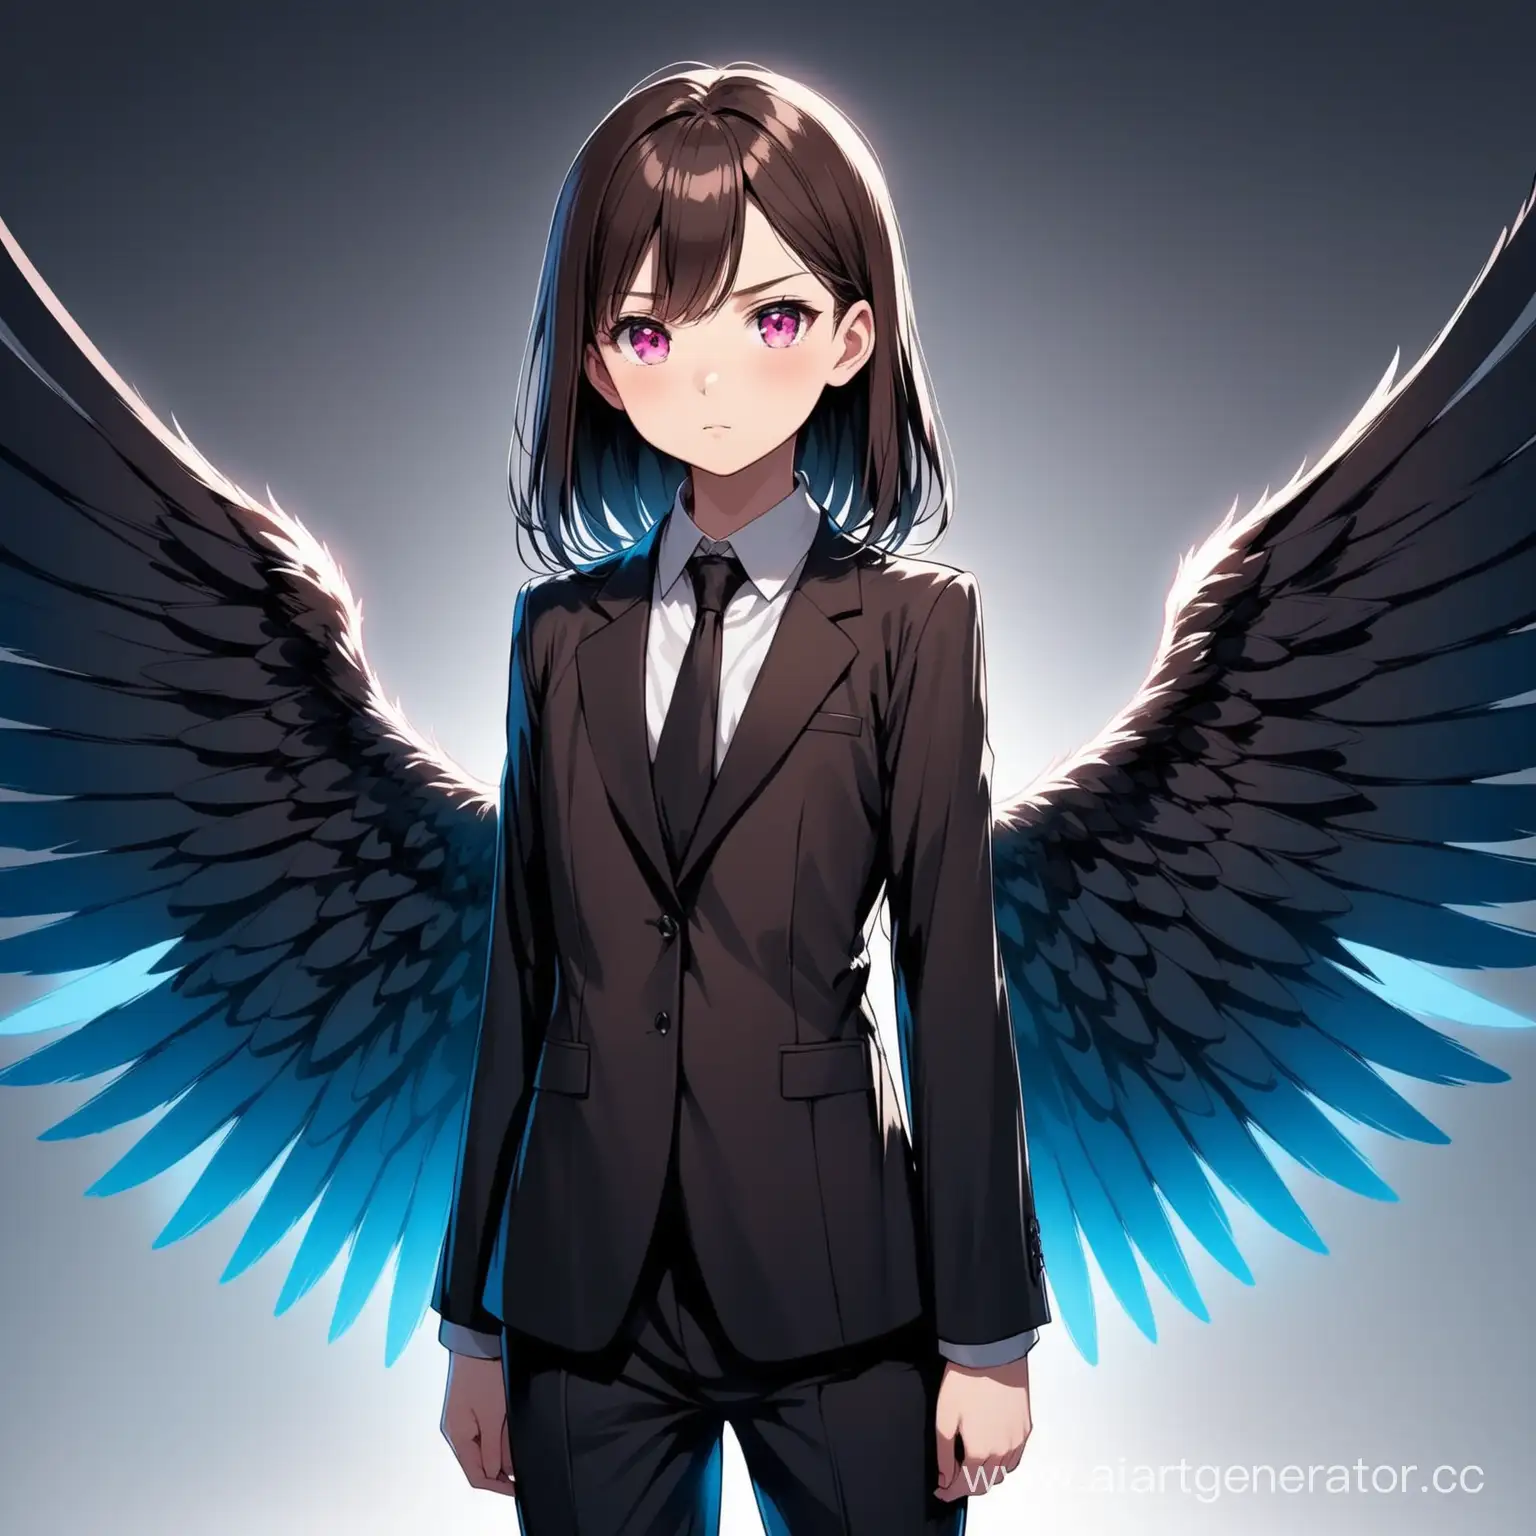 Enigmatic-12YearOld-Girl-with-Pink-Eyes-and-Blue-Wings-in-Black-Suit